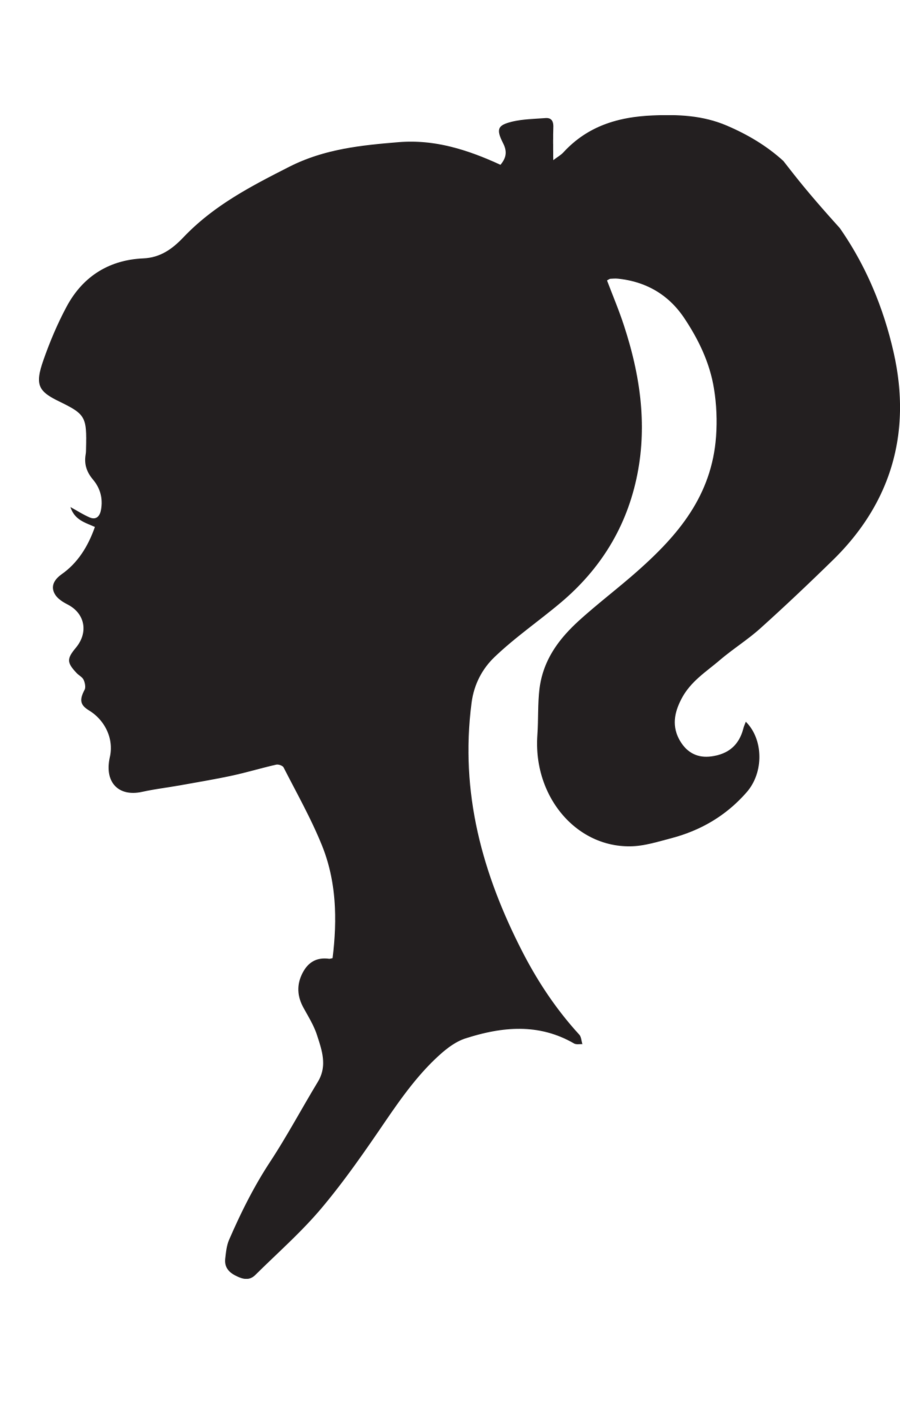 Lady clipart silhouette. Female profile by snicklefritz